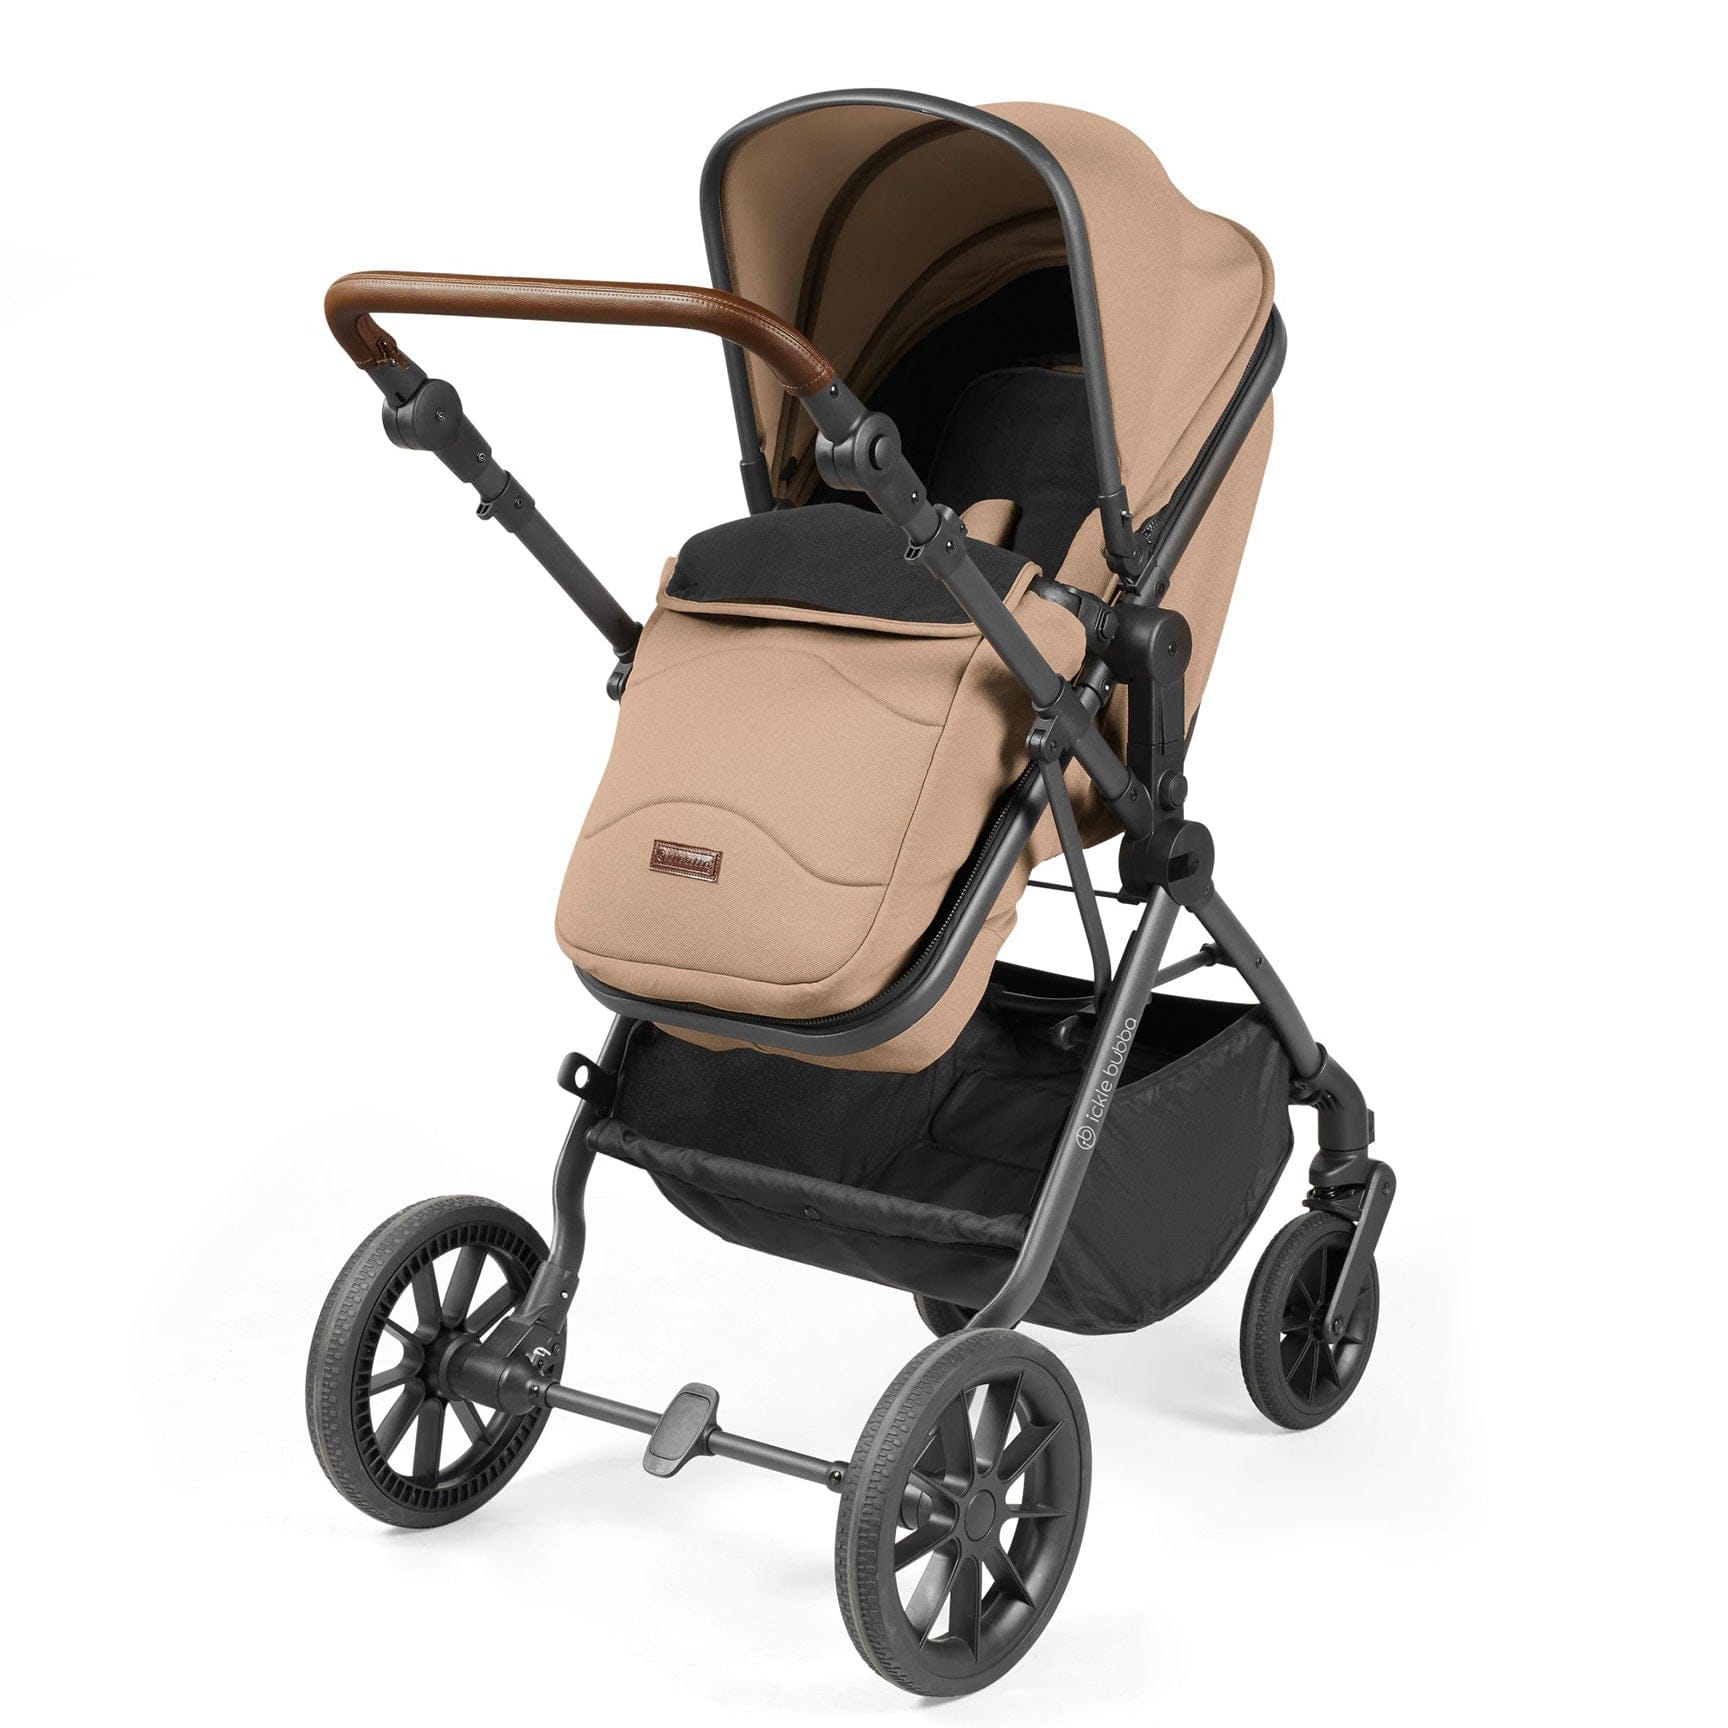 Ickle Bubba Ickle Bubba Cosmo 2 in 1 Plus Carrycot & Pushchair in Gun metal/Desert Travel Systems 10-007-001-136 5056515025637